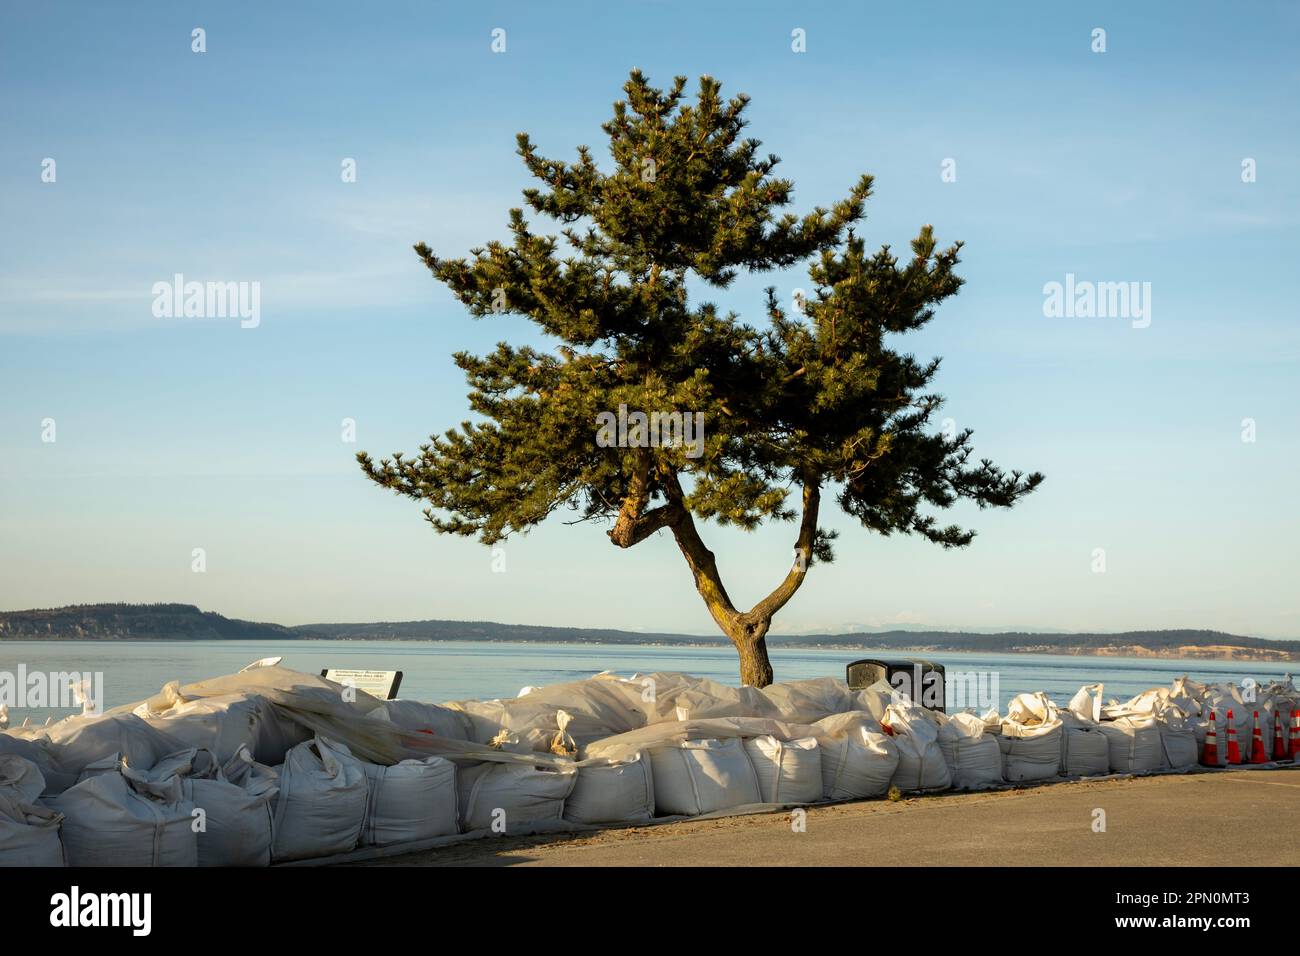 WA23332-00...WASHINGTON - Sand bags protecting the road to Point No Point Lighthouse from erosion during winter storms. Stock Photo